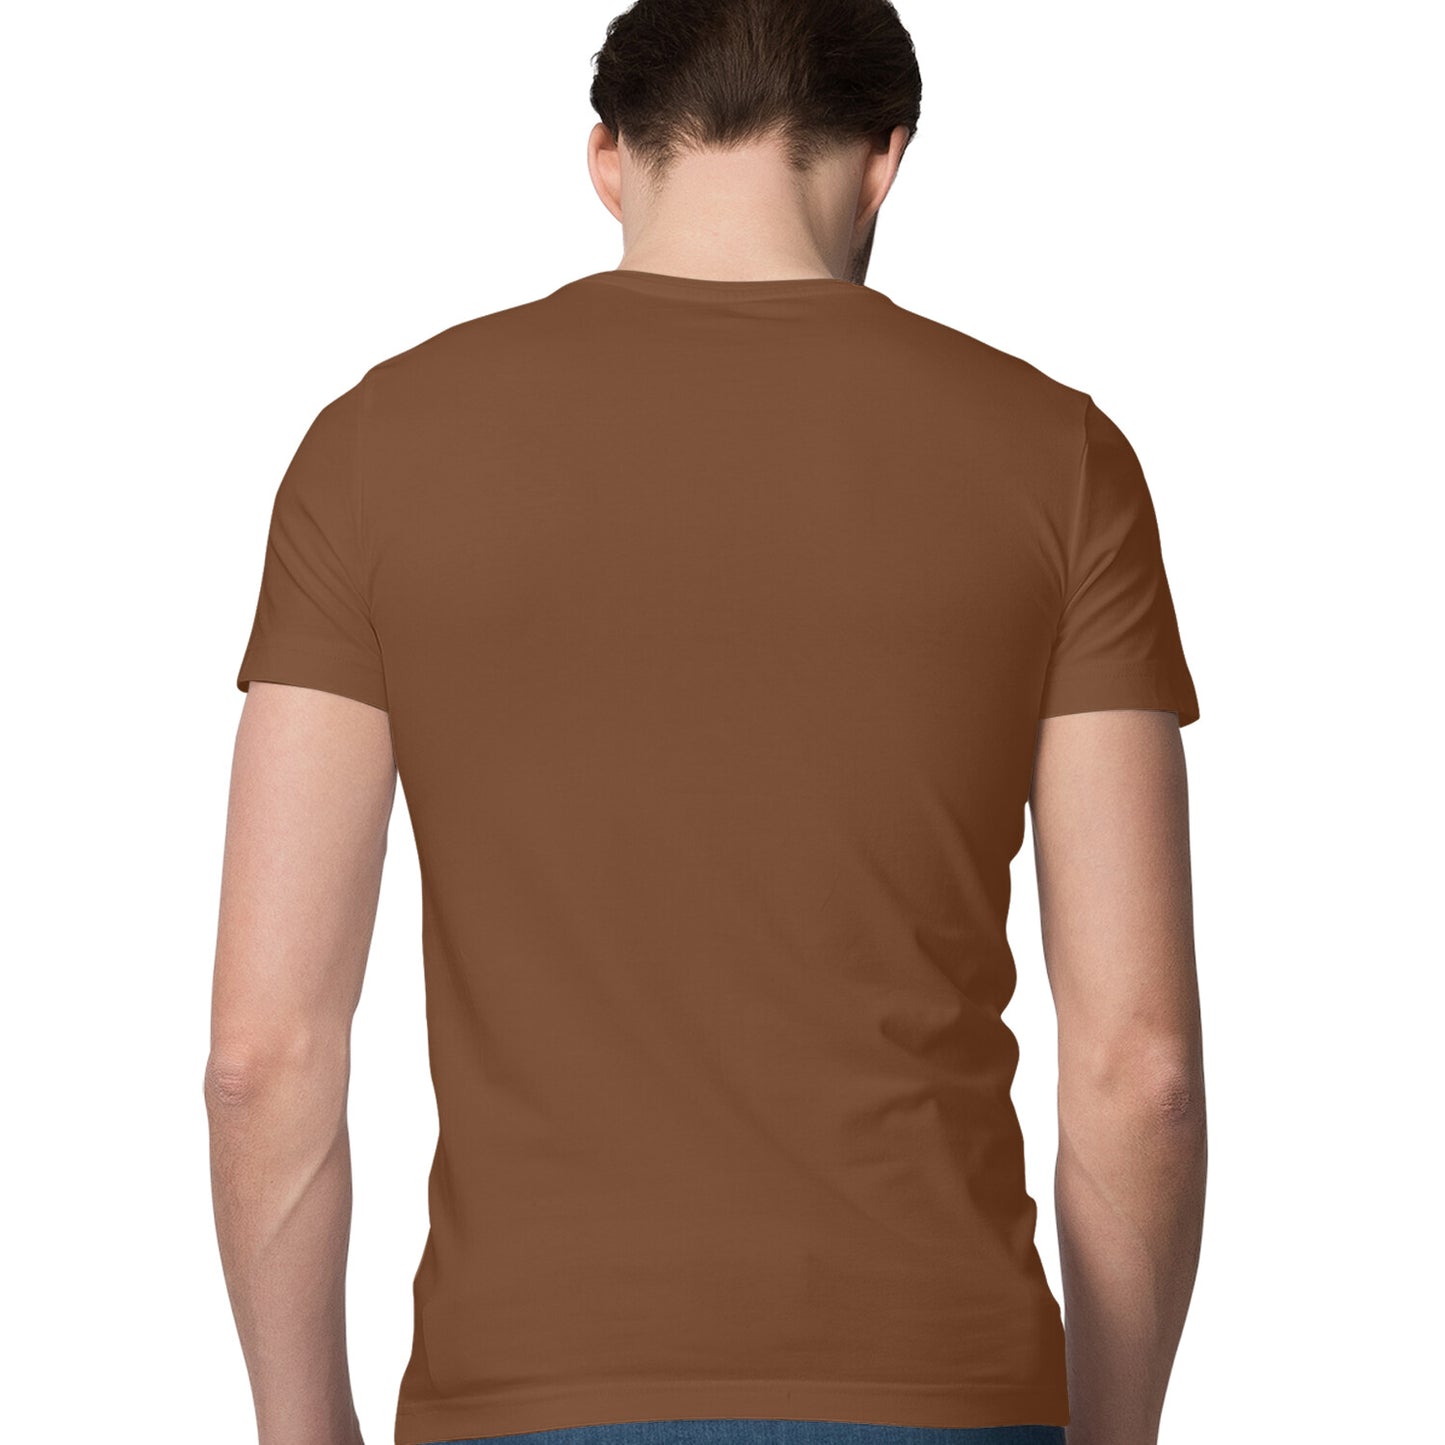 Catch the sunset - Coffee Brown T-shirt - Men